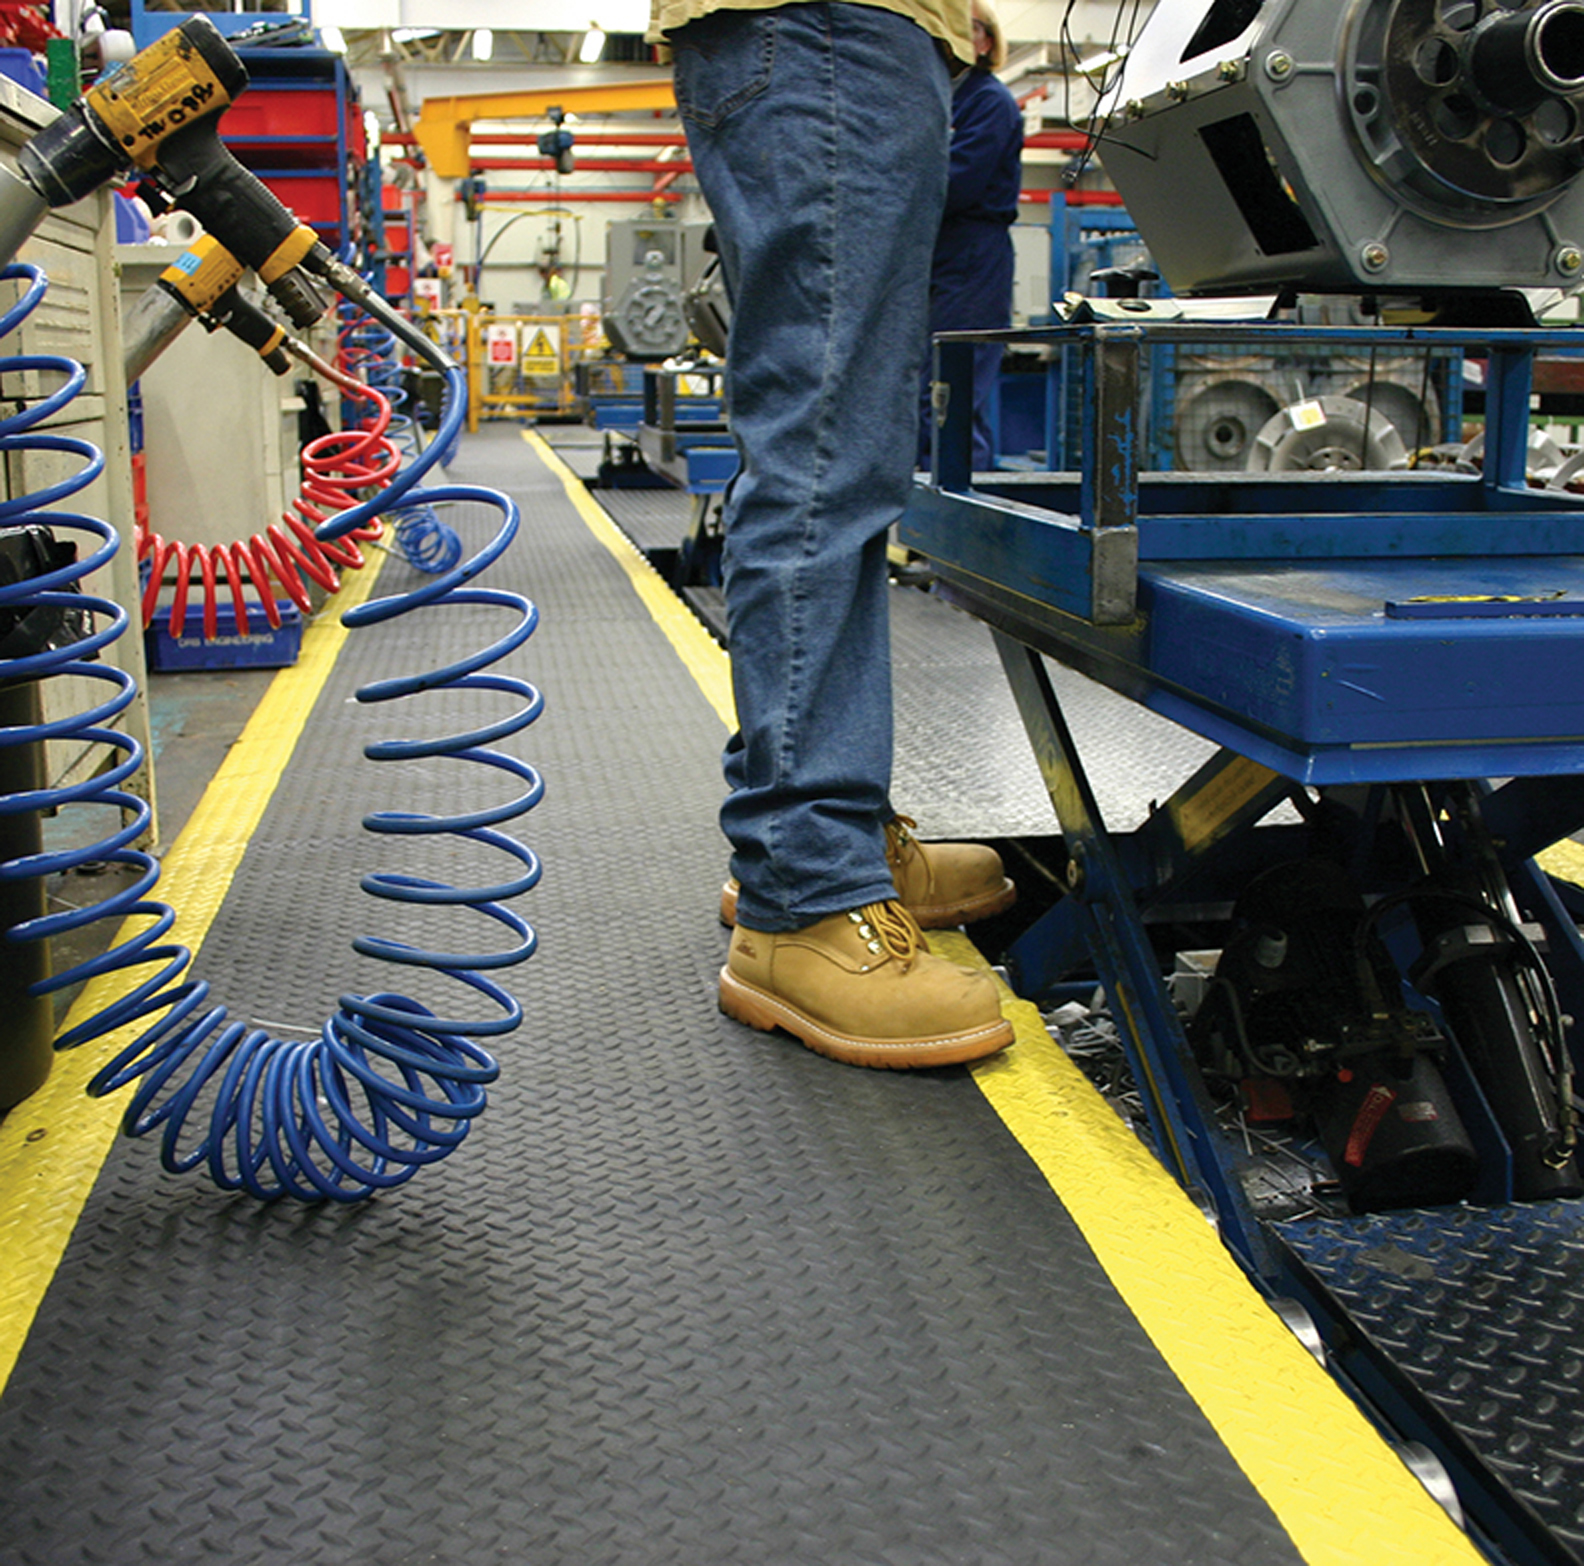 CUSTOM LENGTH ANTI-FATIGUE MATS NOW AVAILABLE FROM FIRST MATS